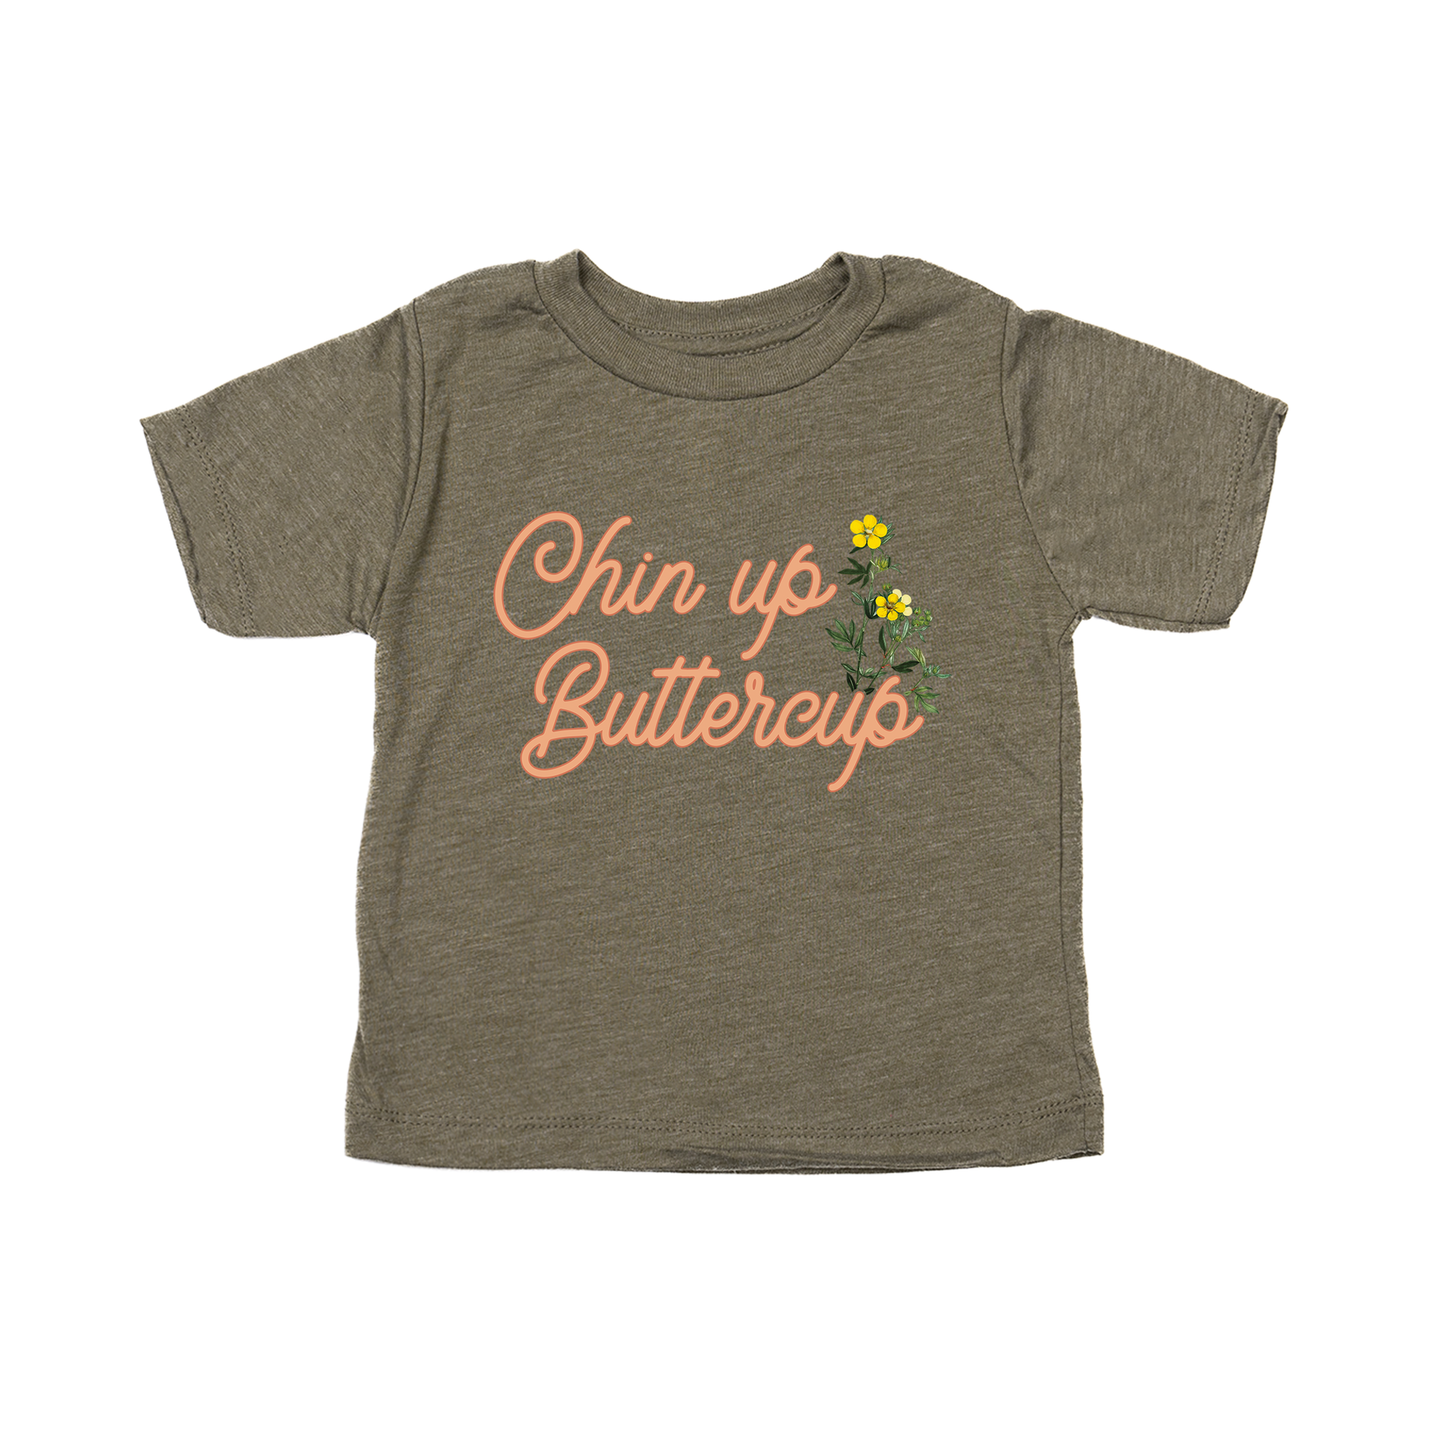 Chin Up Buttercup - Kids Tee (Olive)